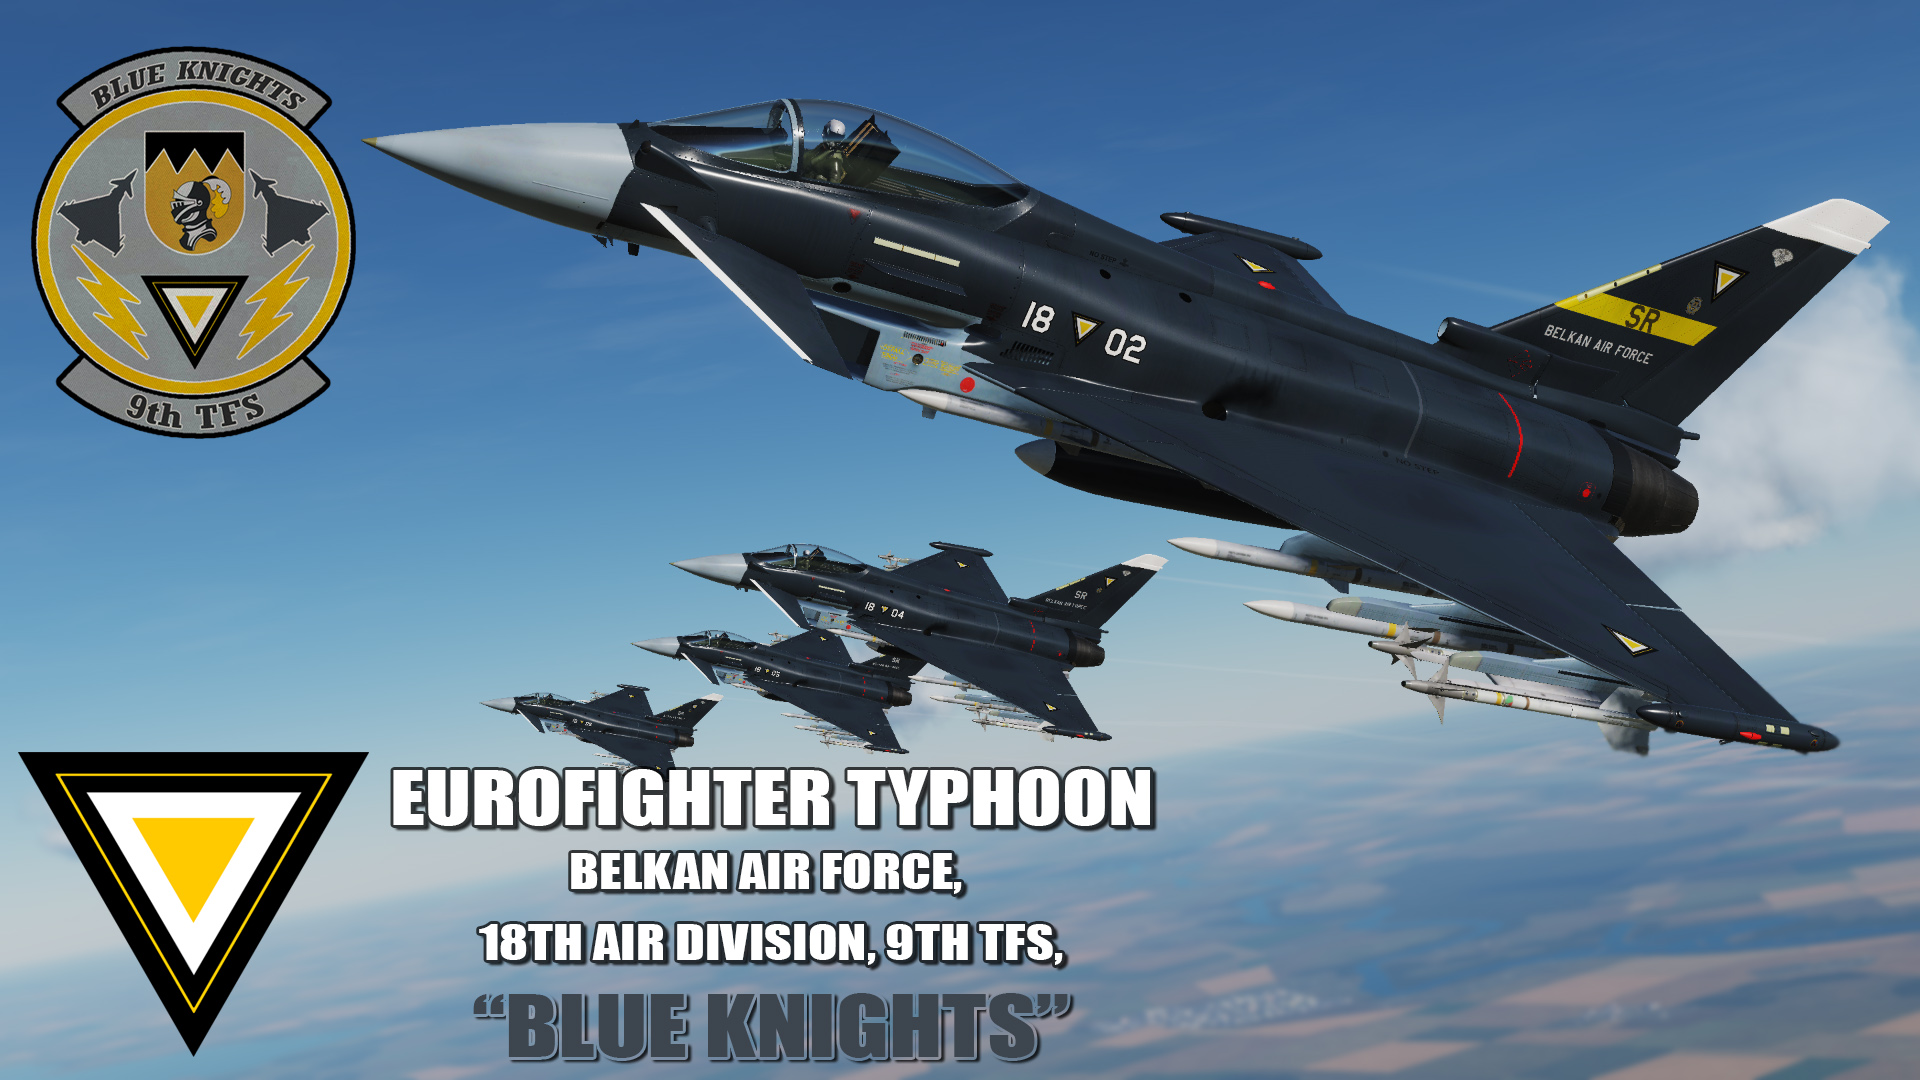 Ace Combat - Belkan Air Force 18th Air Division 9th Tactical Fighter Squadron "Blue Knights" Eurofighter Typhoon